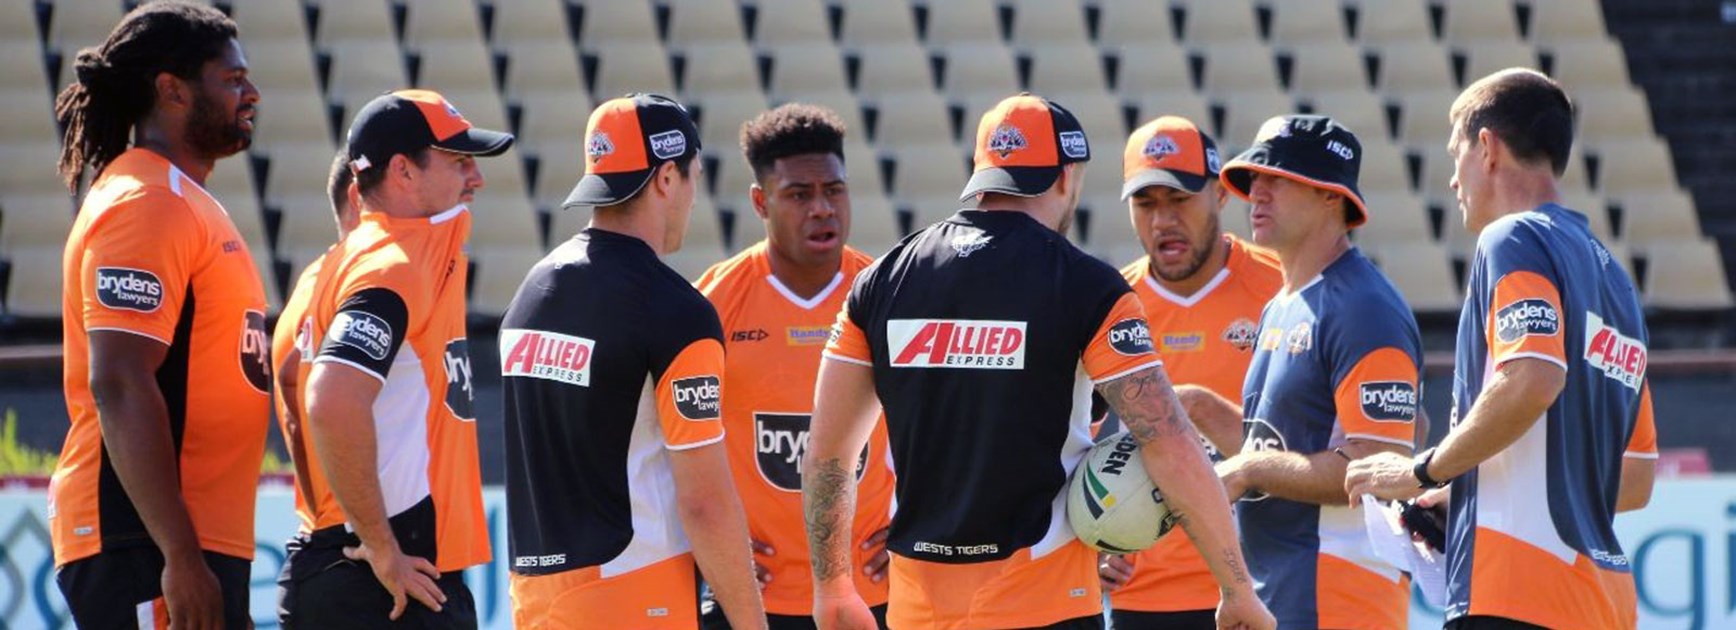 Wests Tigers players during pre-season training.